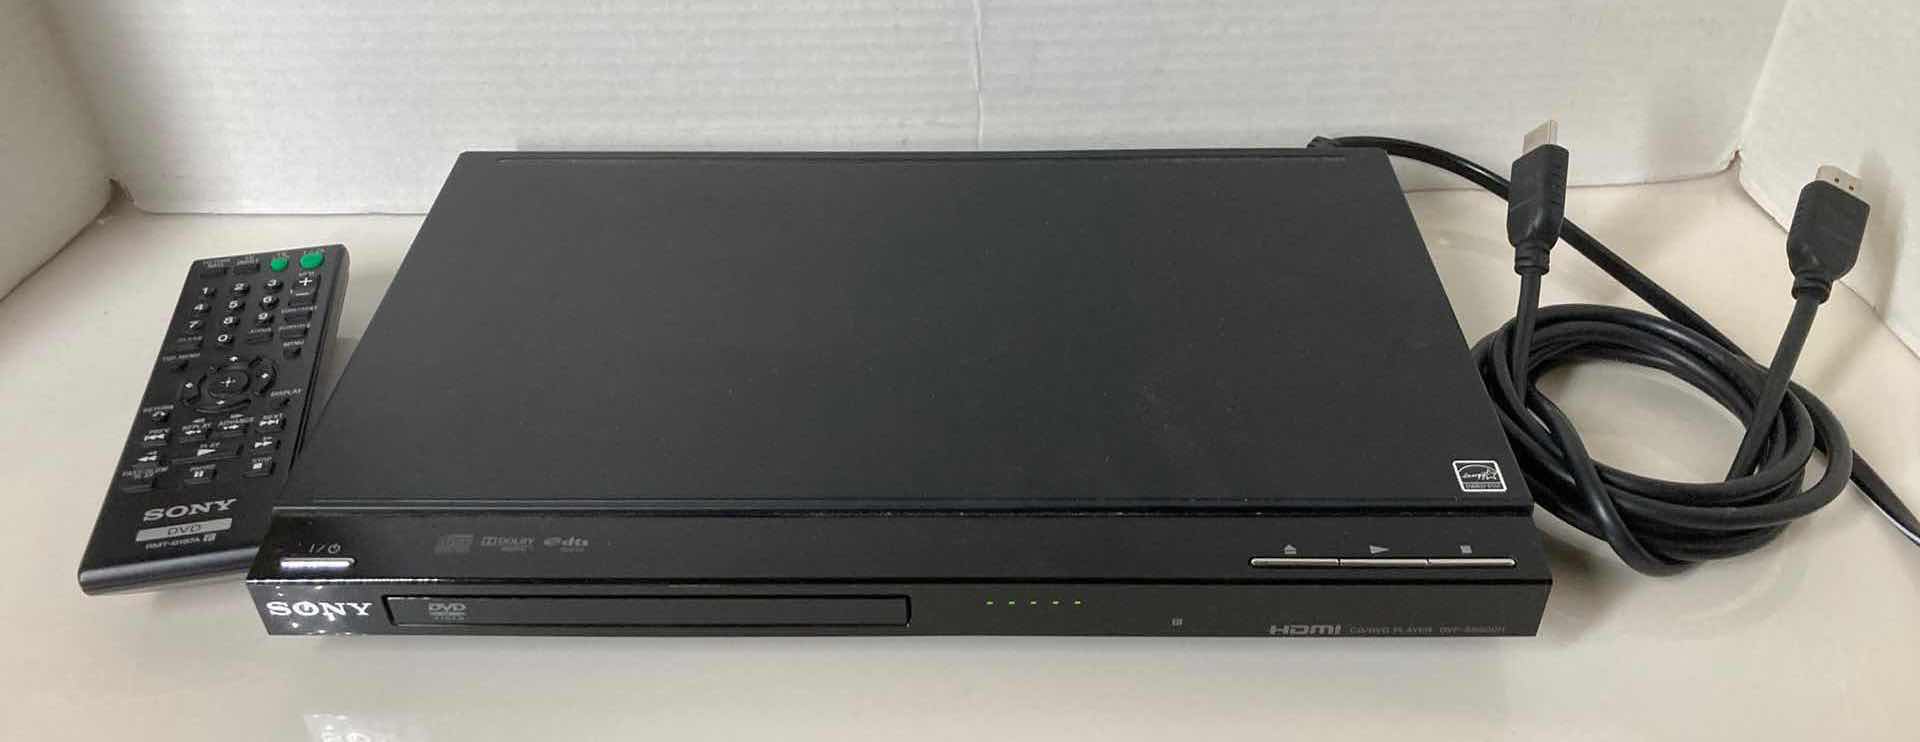 Photo 1 of SONY DVD PLAYER MODEL DVP-SR500H W REMOTE & HDMI CABLE